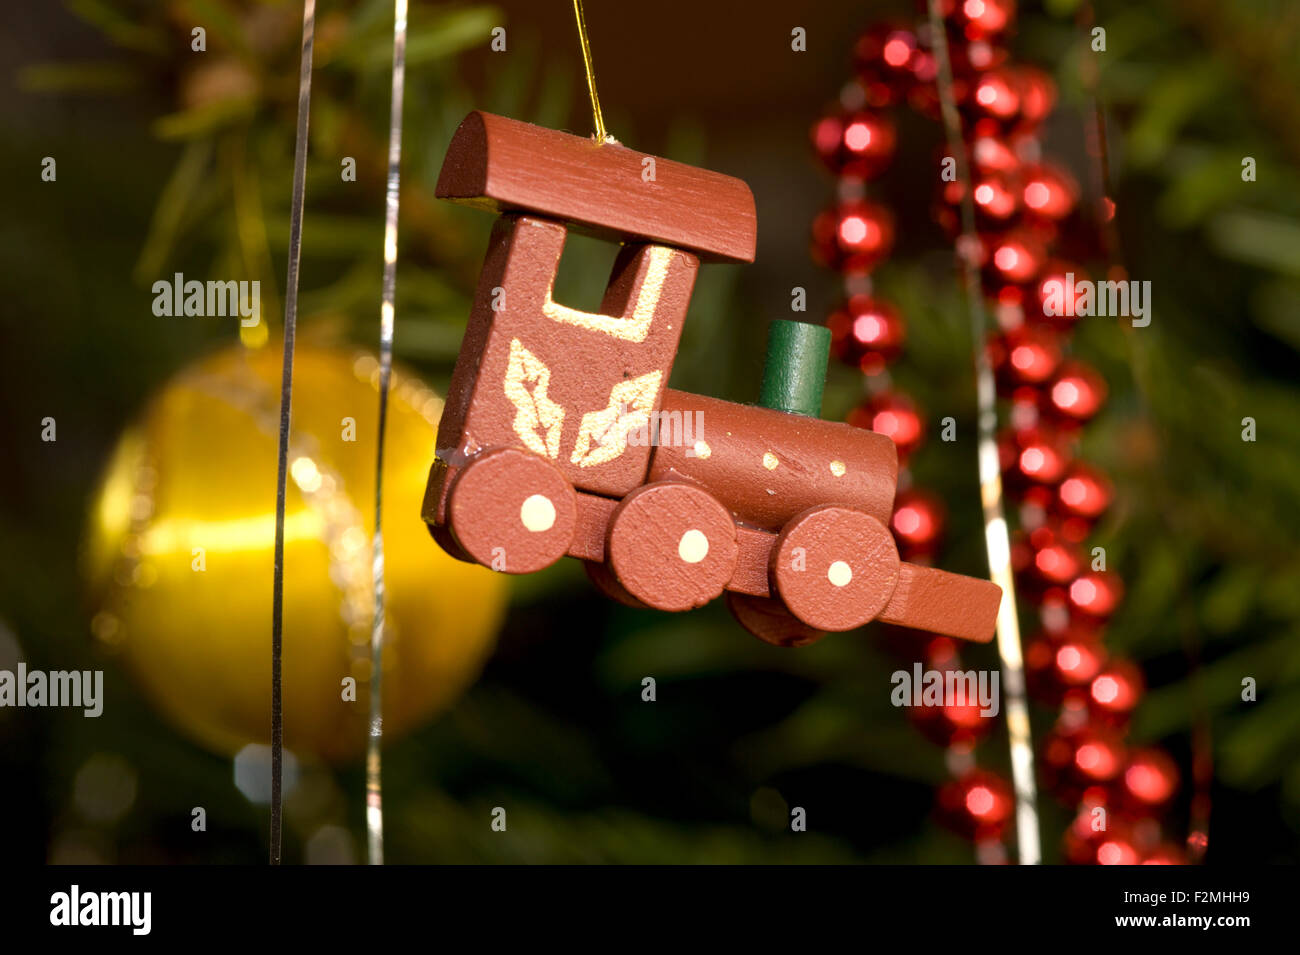 close up detail of a wooden steam engine toy hanging from a traditional christmas tree Stock Photo